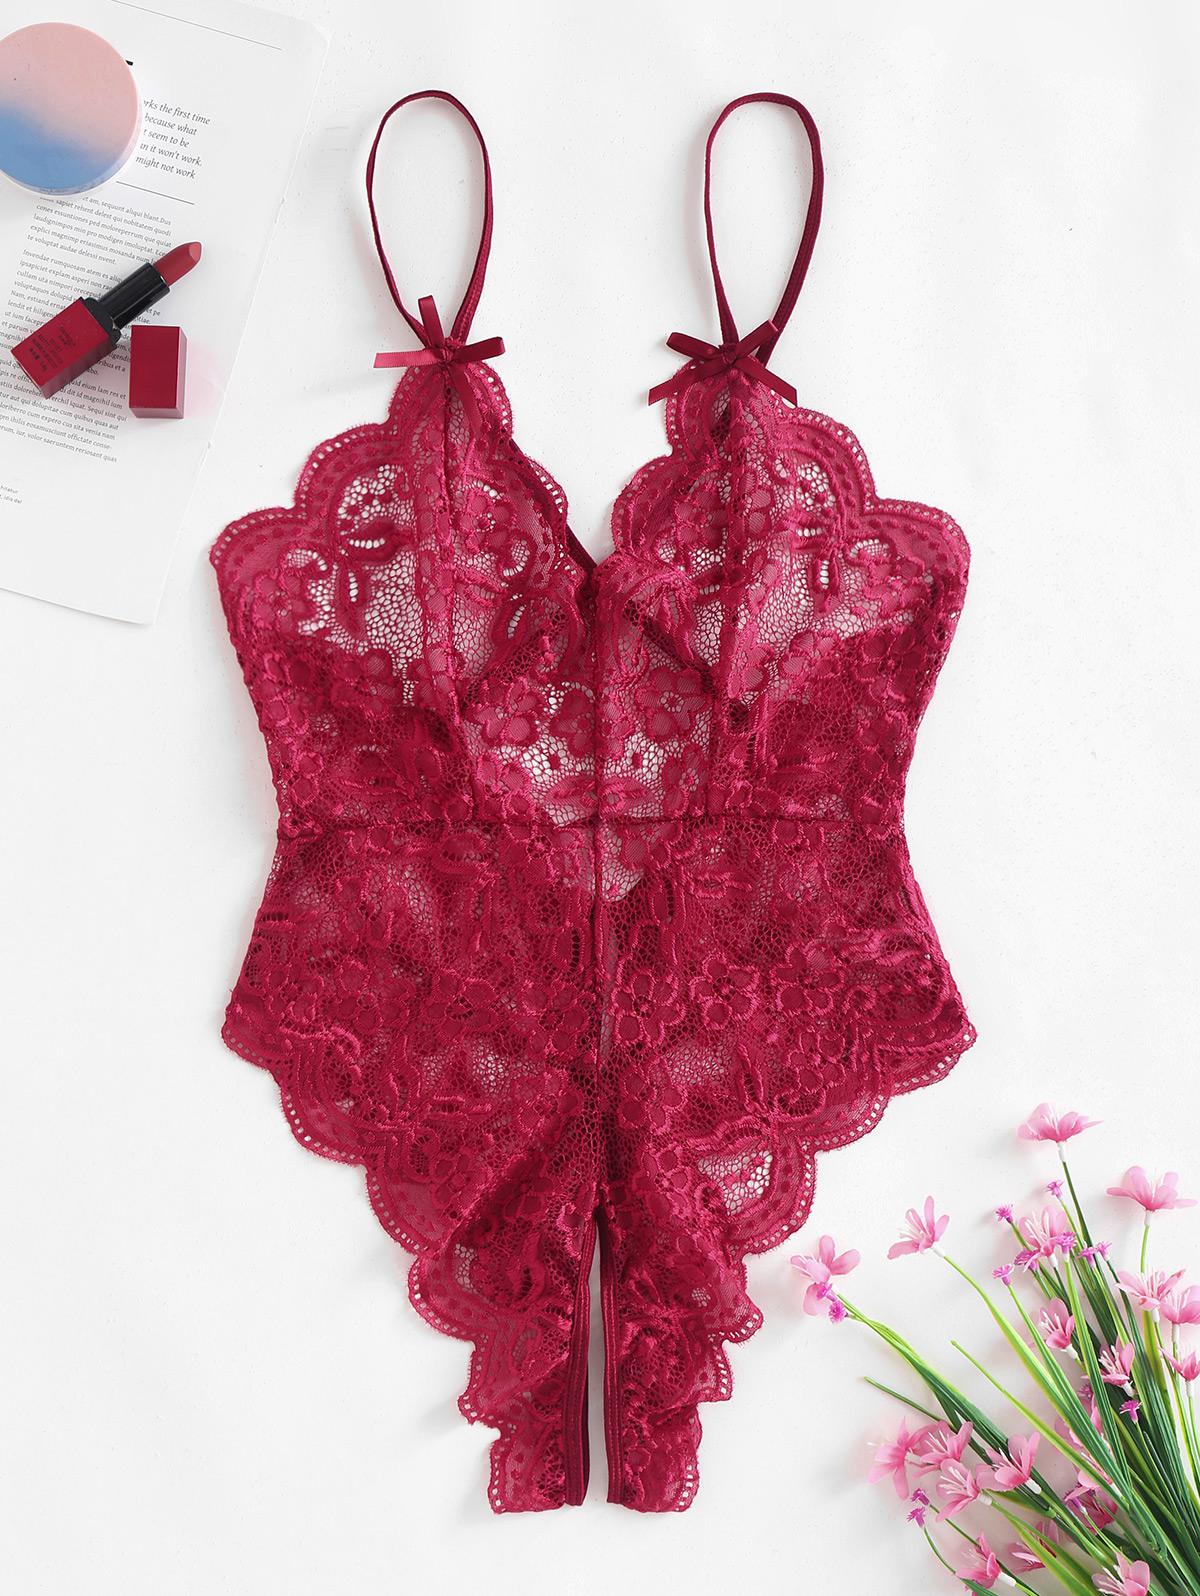 Sheer Scalloped Lace Criss Cross Crotchless Lingerie Teddy Xl Deep red